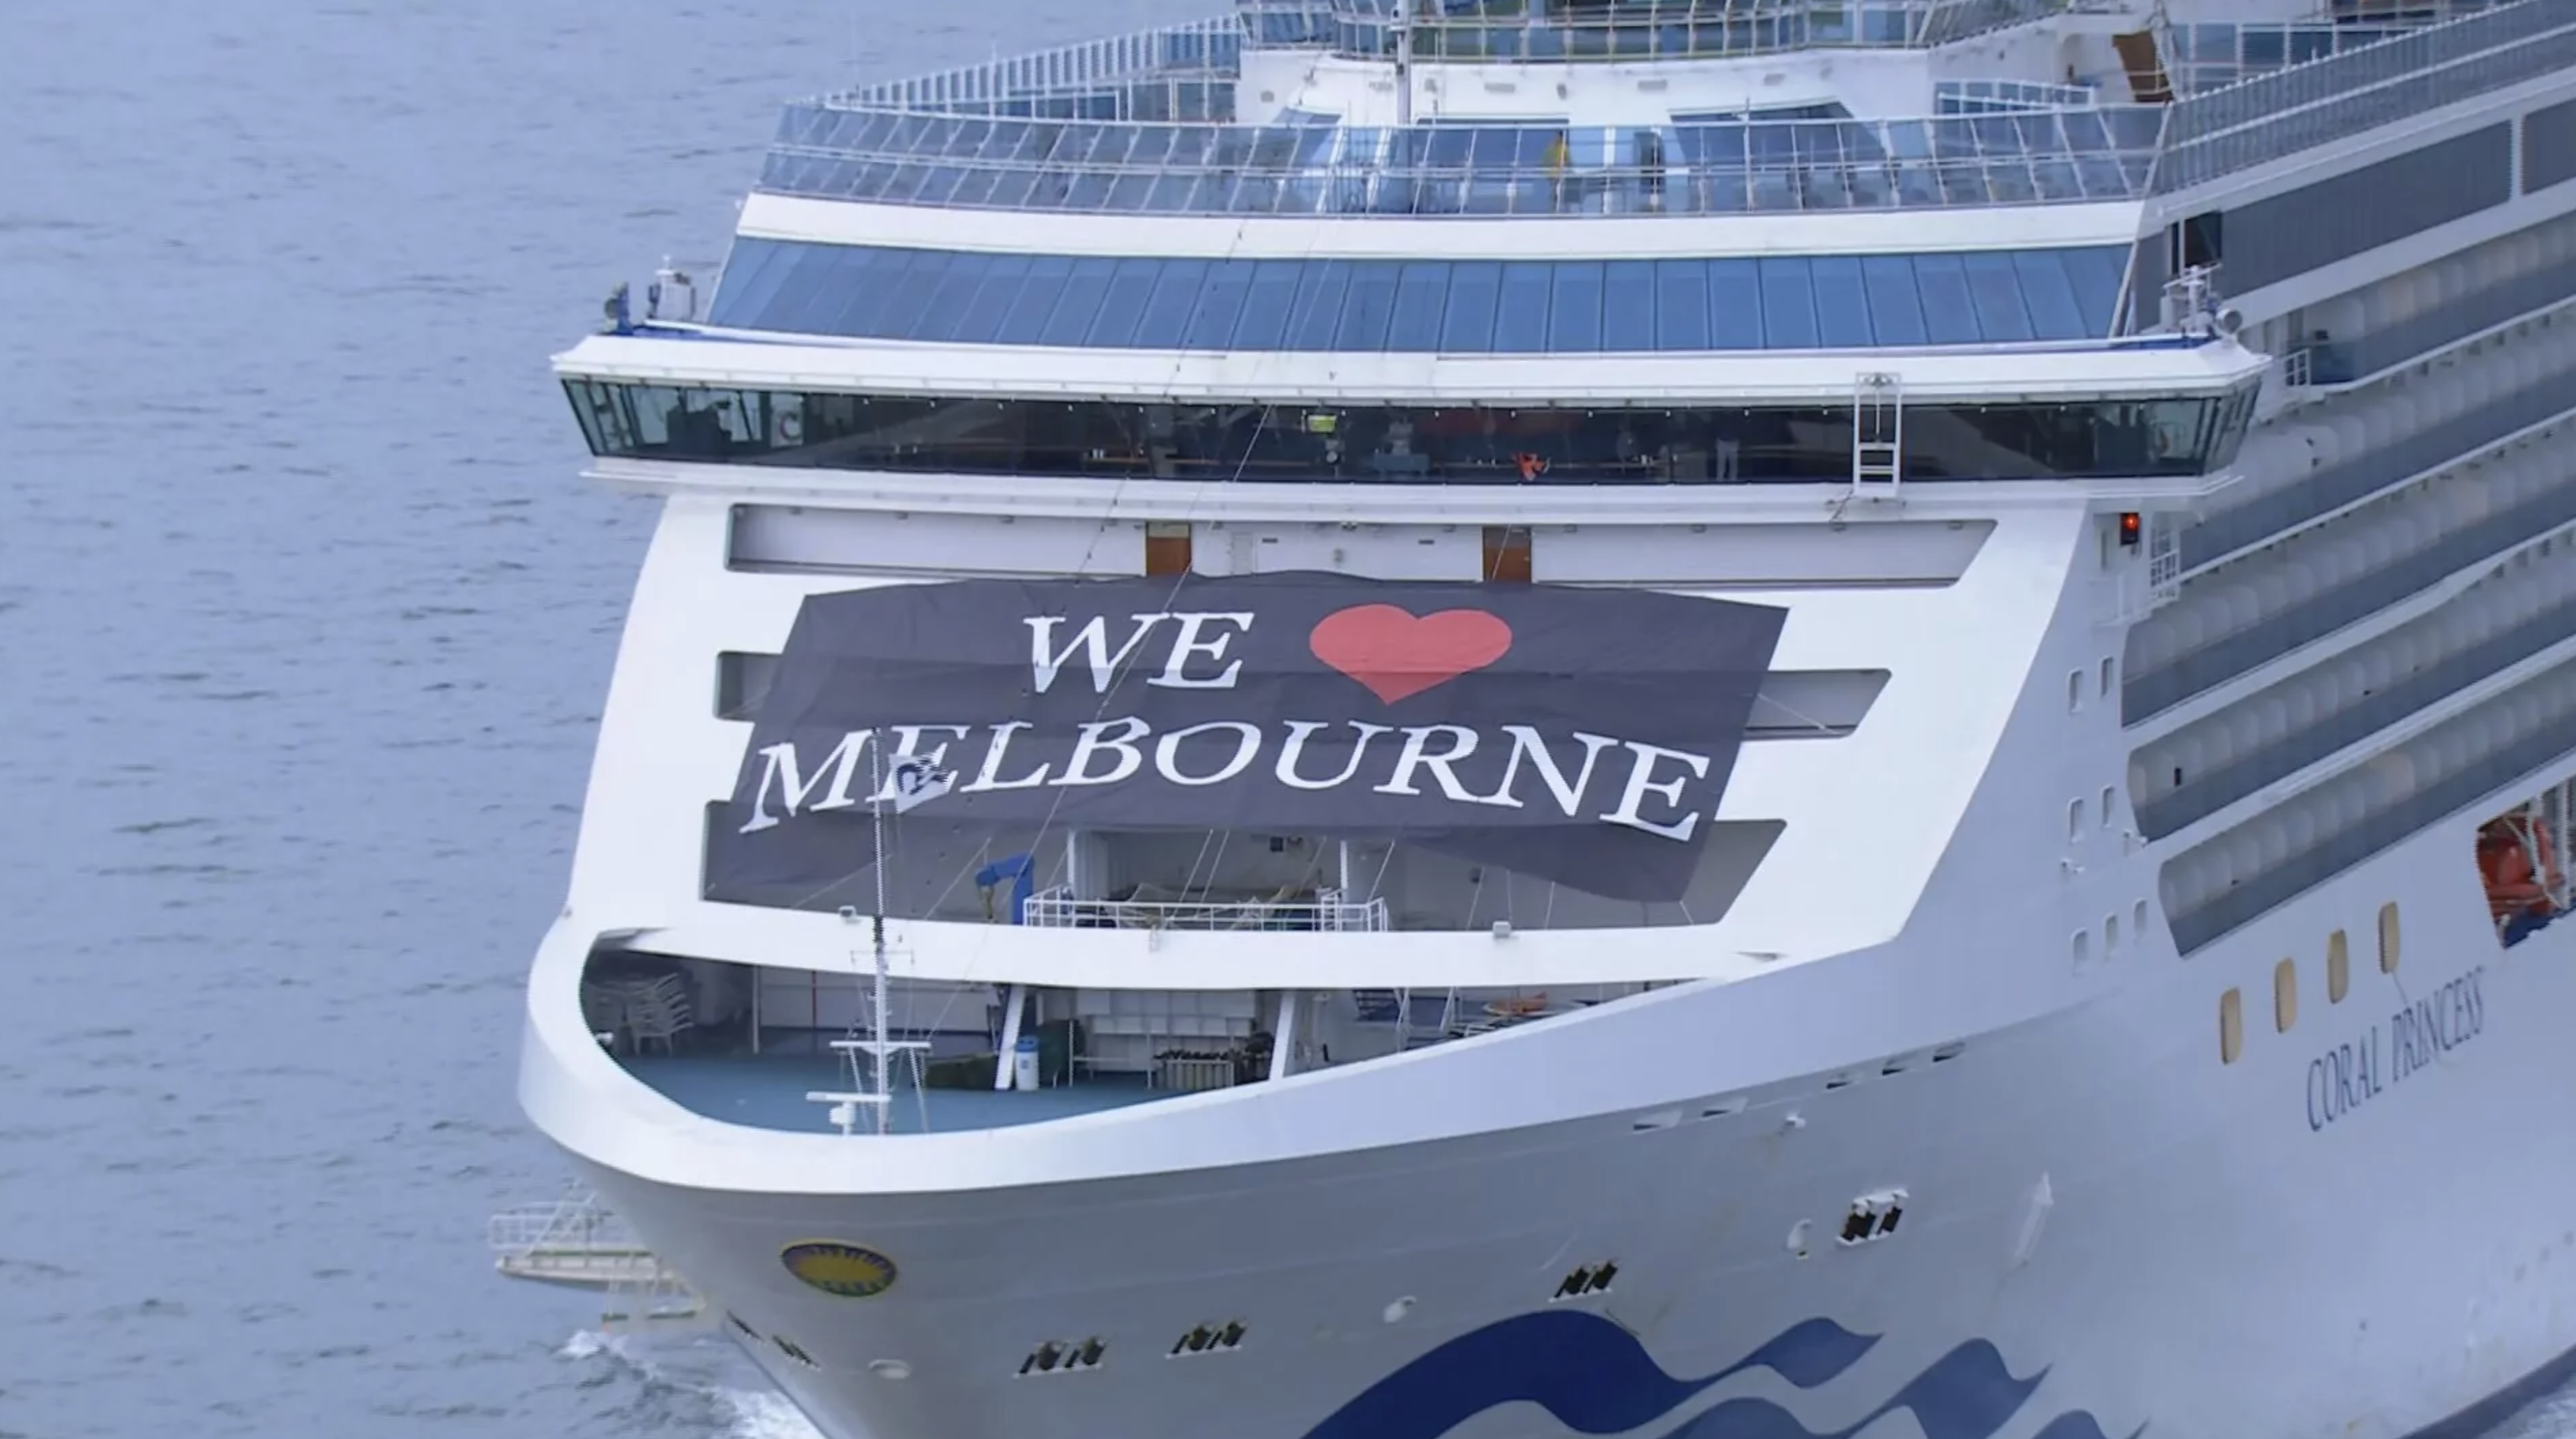 Princess Cruises offers short cruises from Melbourne